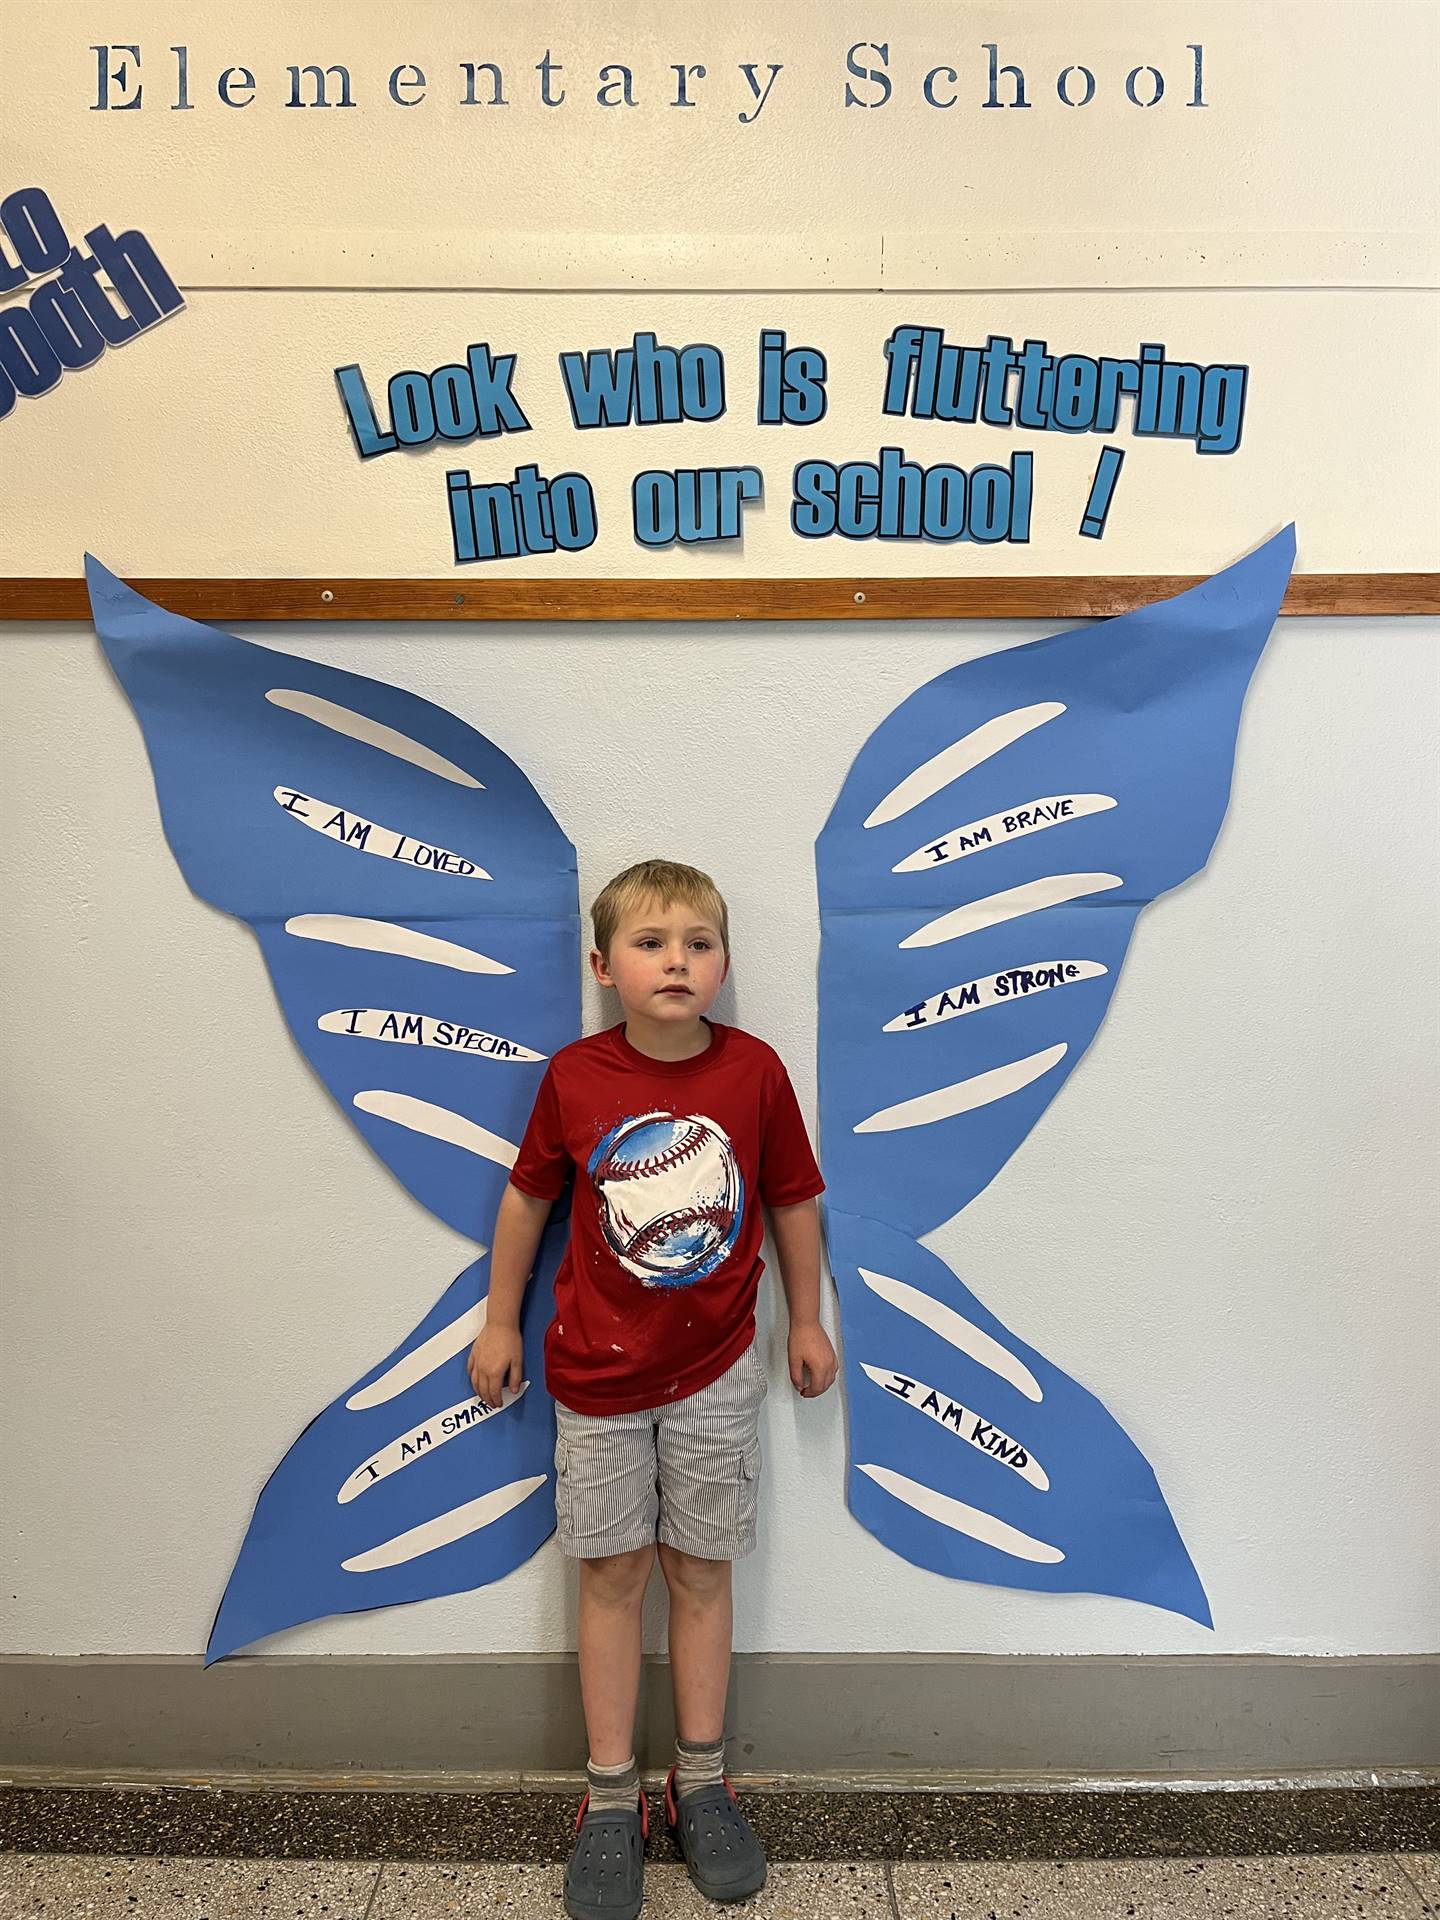 student standing between butterfly wings with sign on top saying "look who is fluttering into our sc